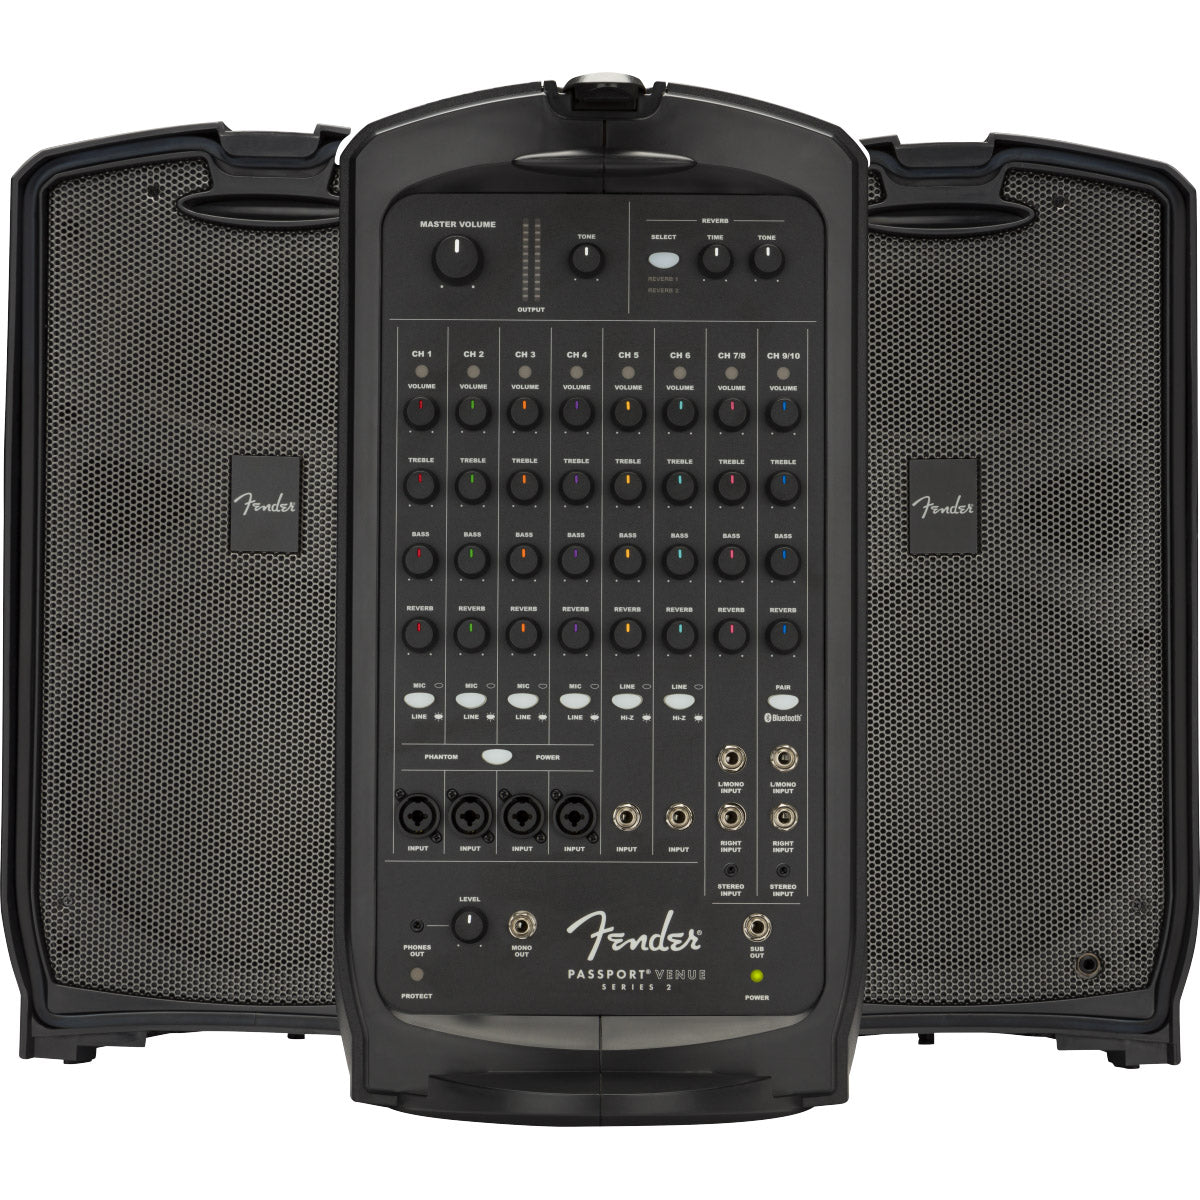 Front view grouped/overlapping components of Fender Passport Venue Series 2 including two speakers and mixer